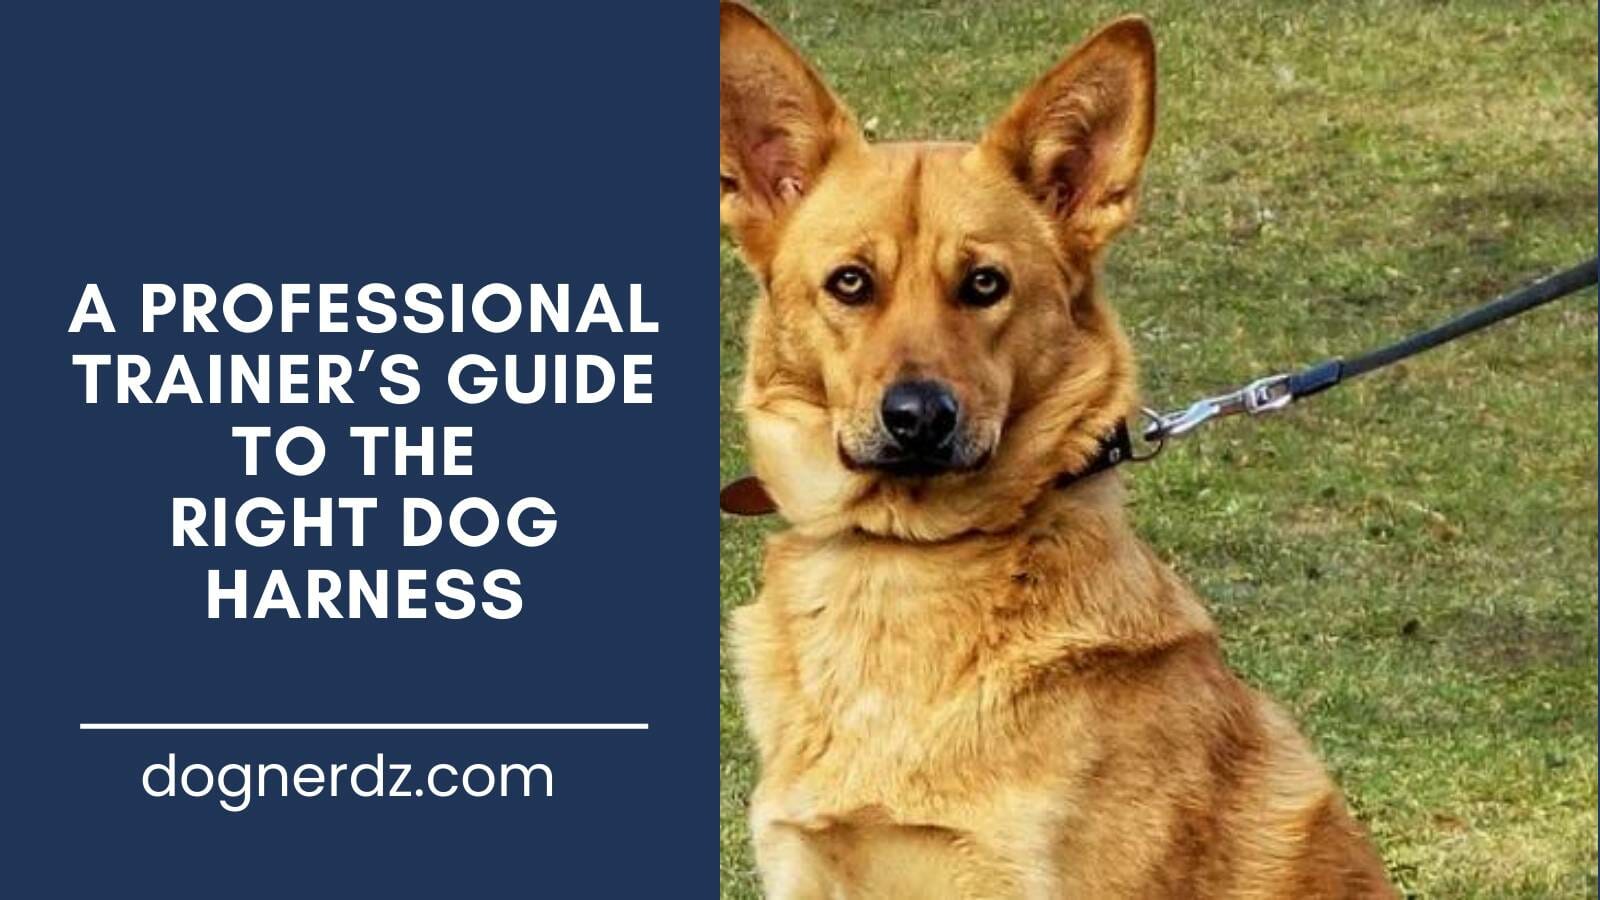 review on the professional trainer’s guide to the right dog harness